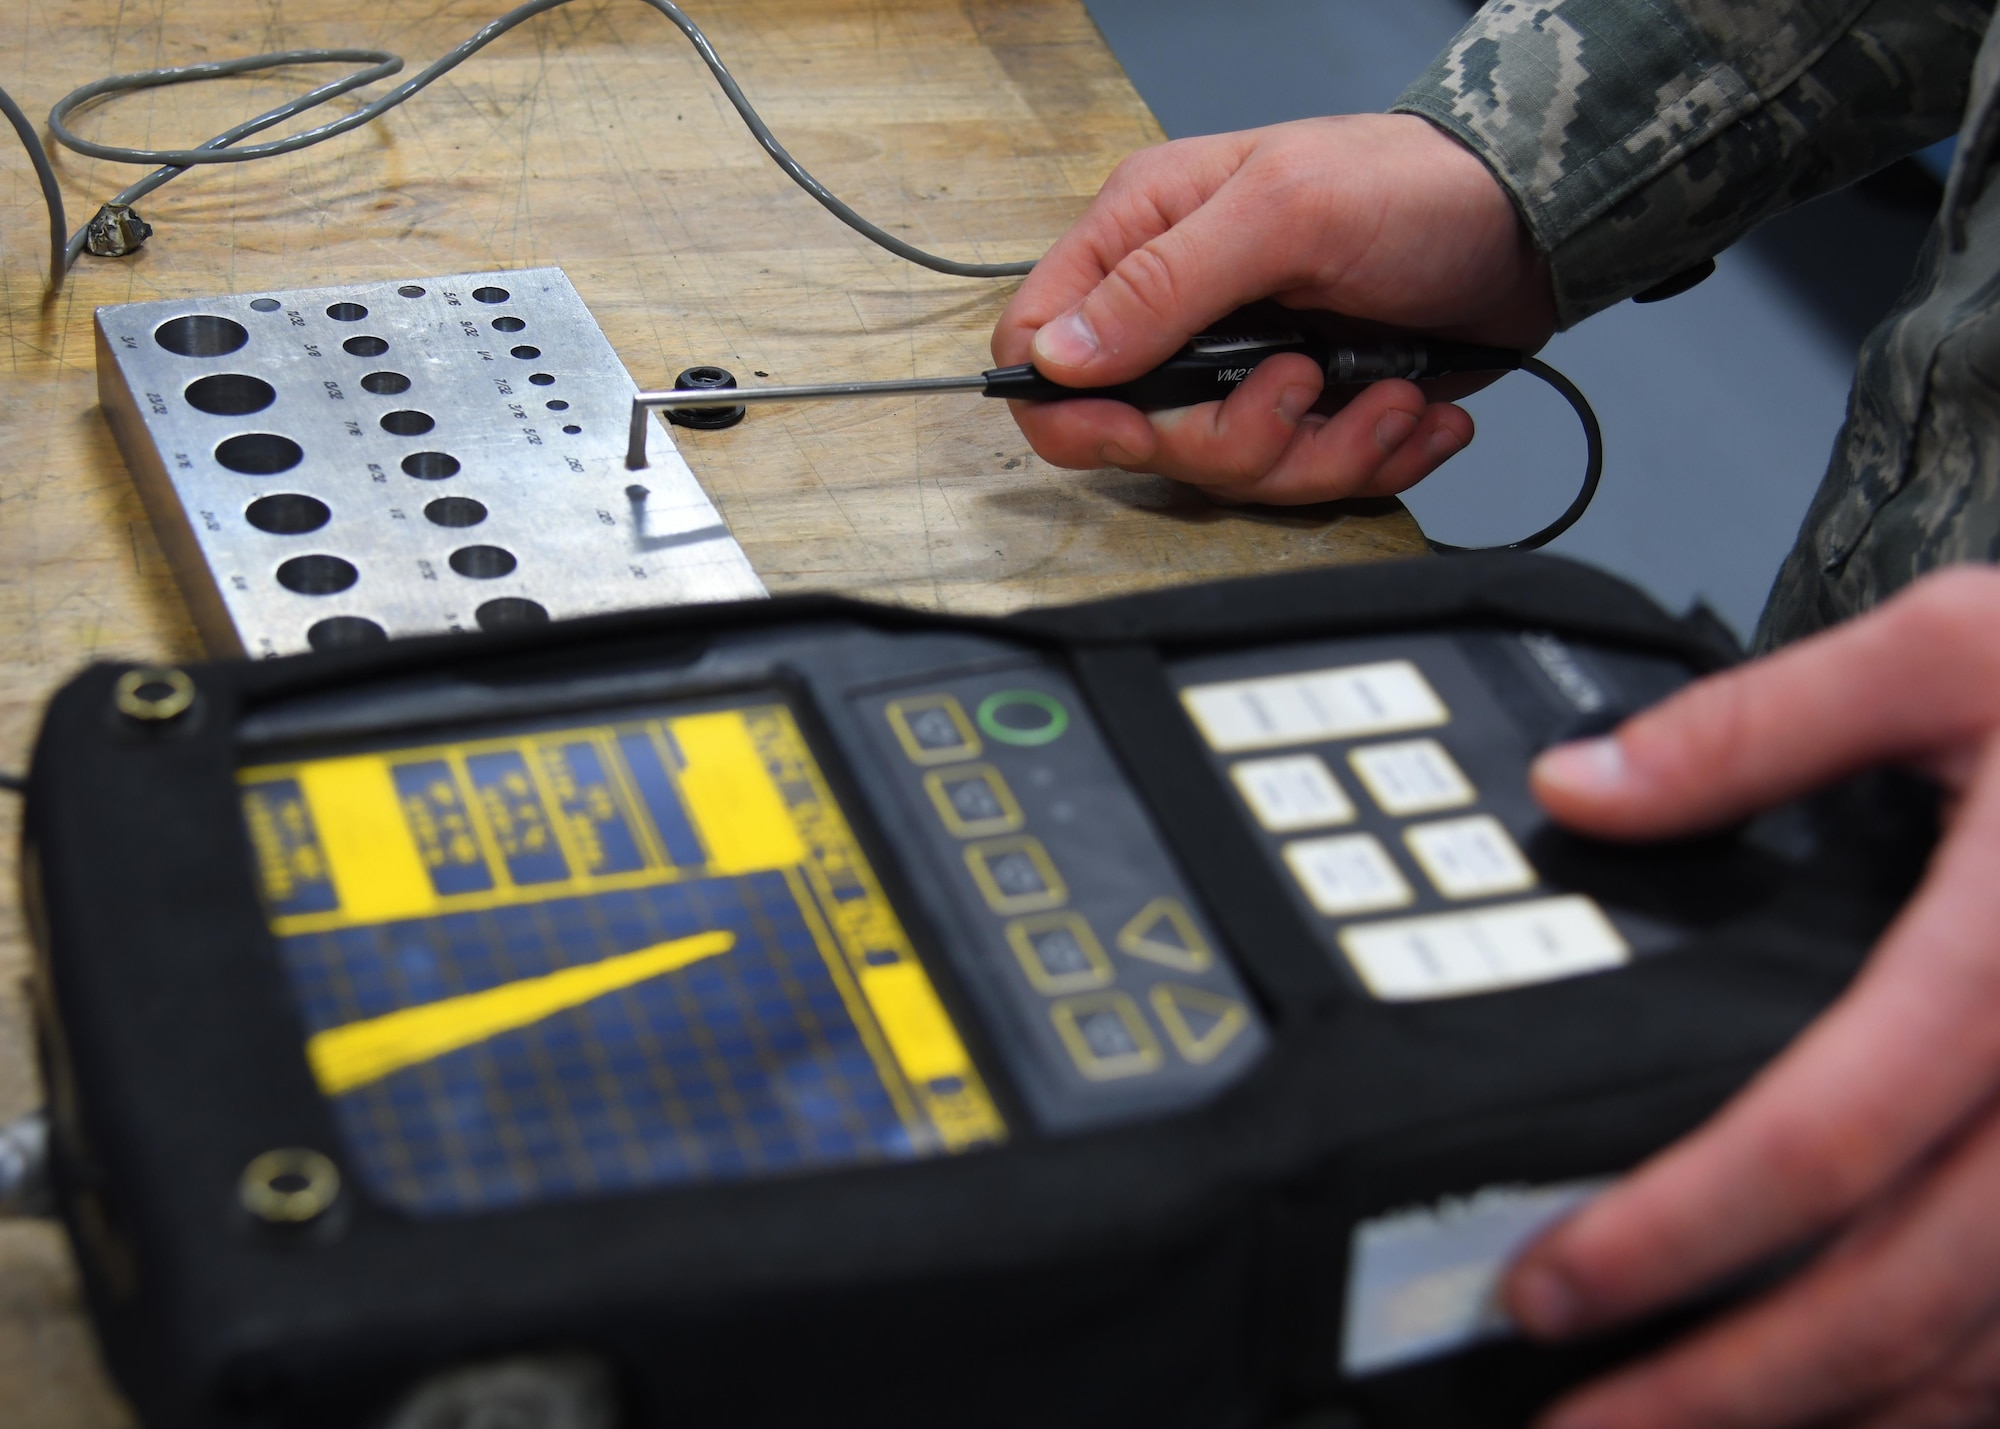 U.S. Air Force Senior Airman Devin Jordan, a non-destructive inspection journeyman with the 379th Expeditionary Maintenance Squadron Fabrication Flight, calibrates an eddy current unit at Al Udeid Air Base, Qatar, Feb. 9, 2017. This unit uses electric current to detect surface-level defects in metal on aircraft. (U.S. Air Force photo by Senior Airman Miles Wilson)